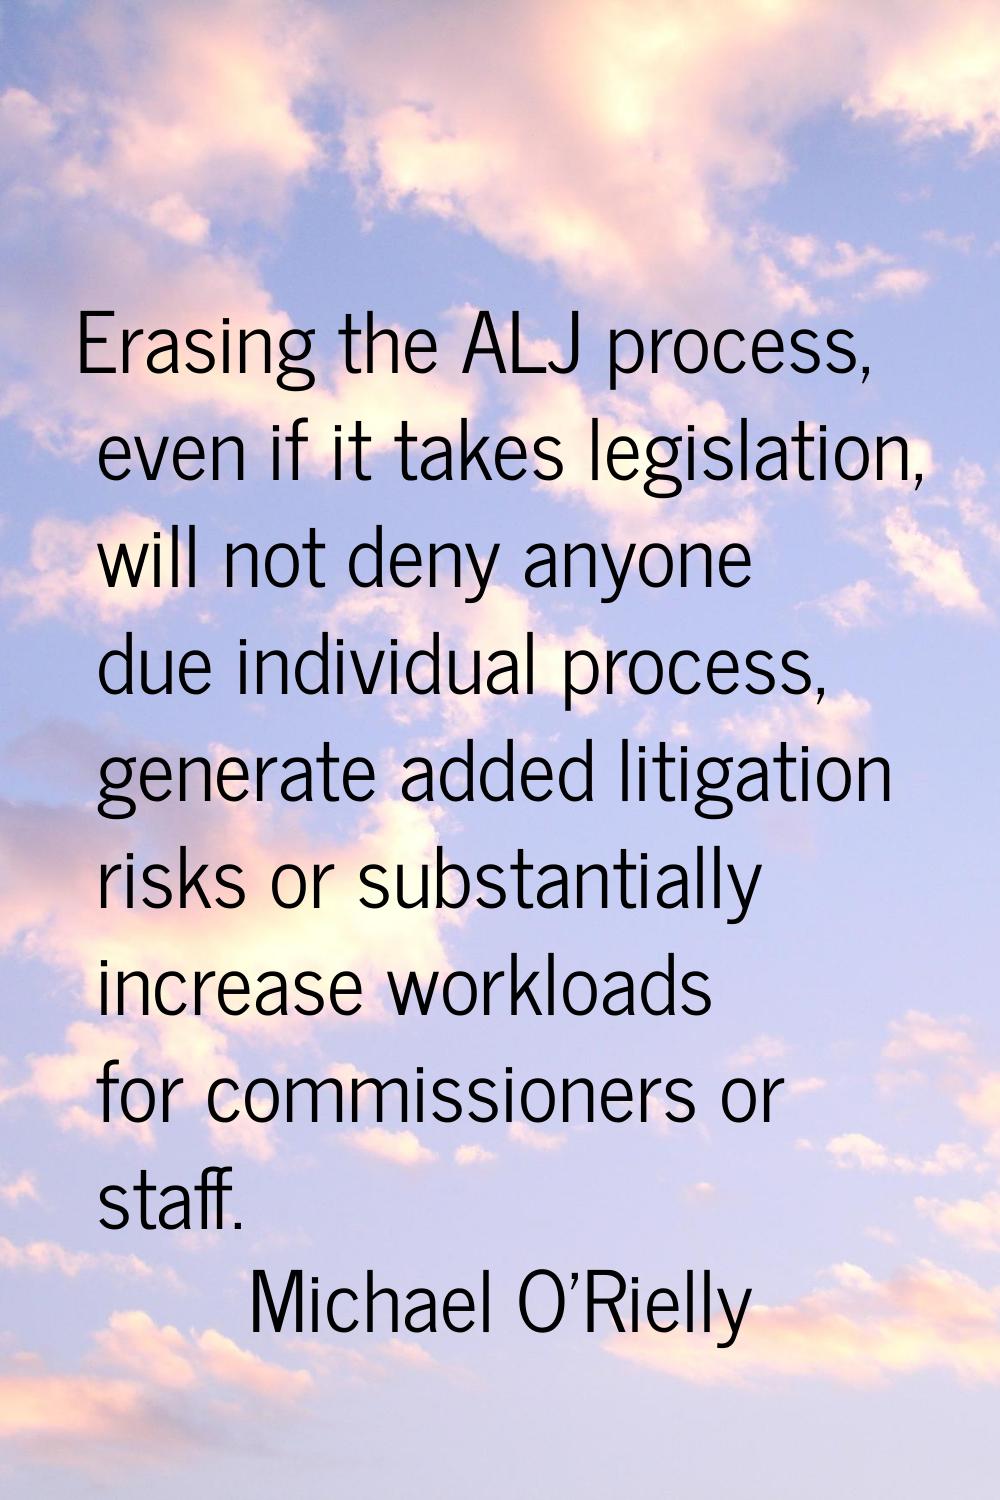 Erasing the ALJ process, even if it takes legislation, will not deny anyone due individual process,